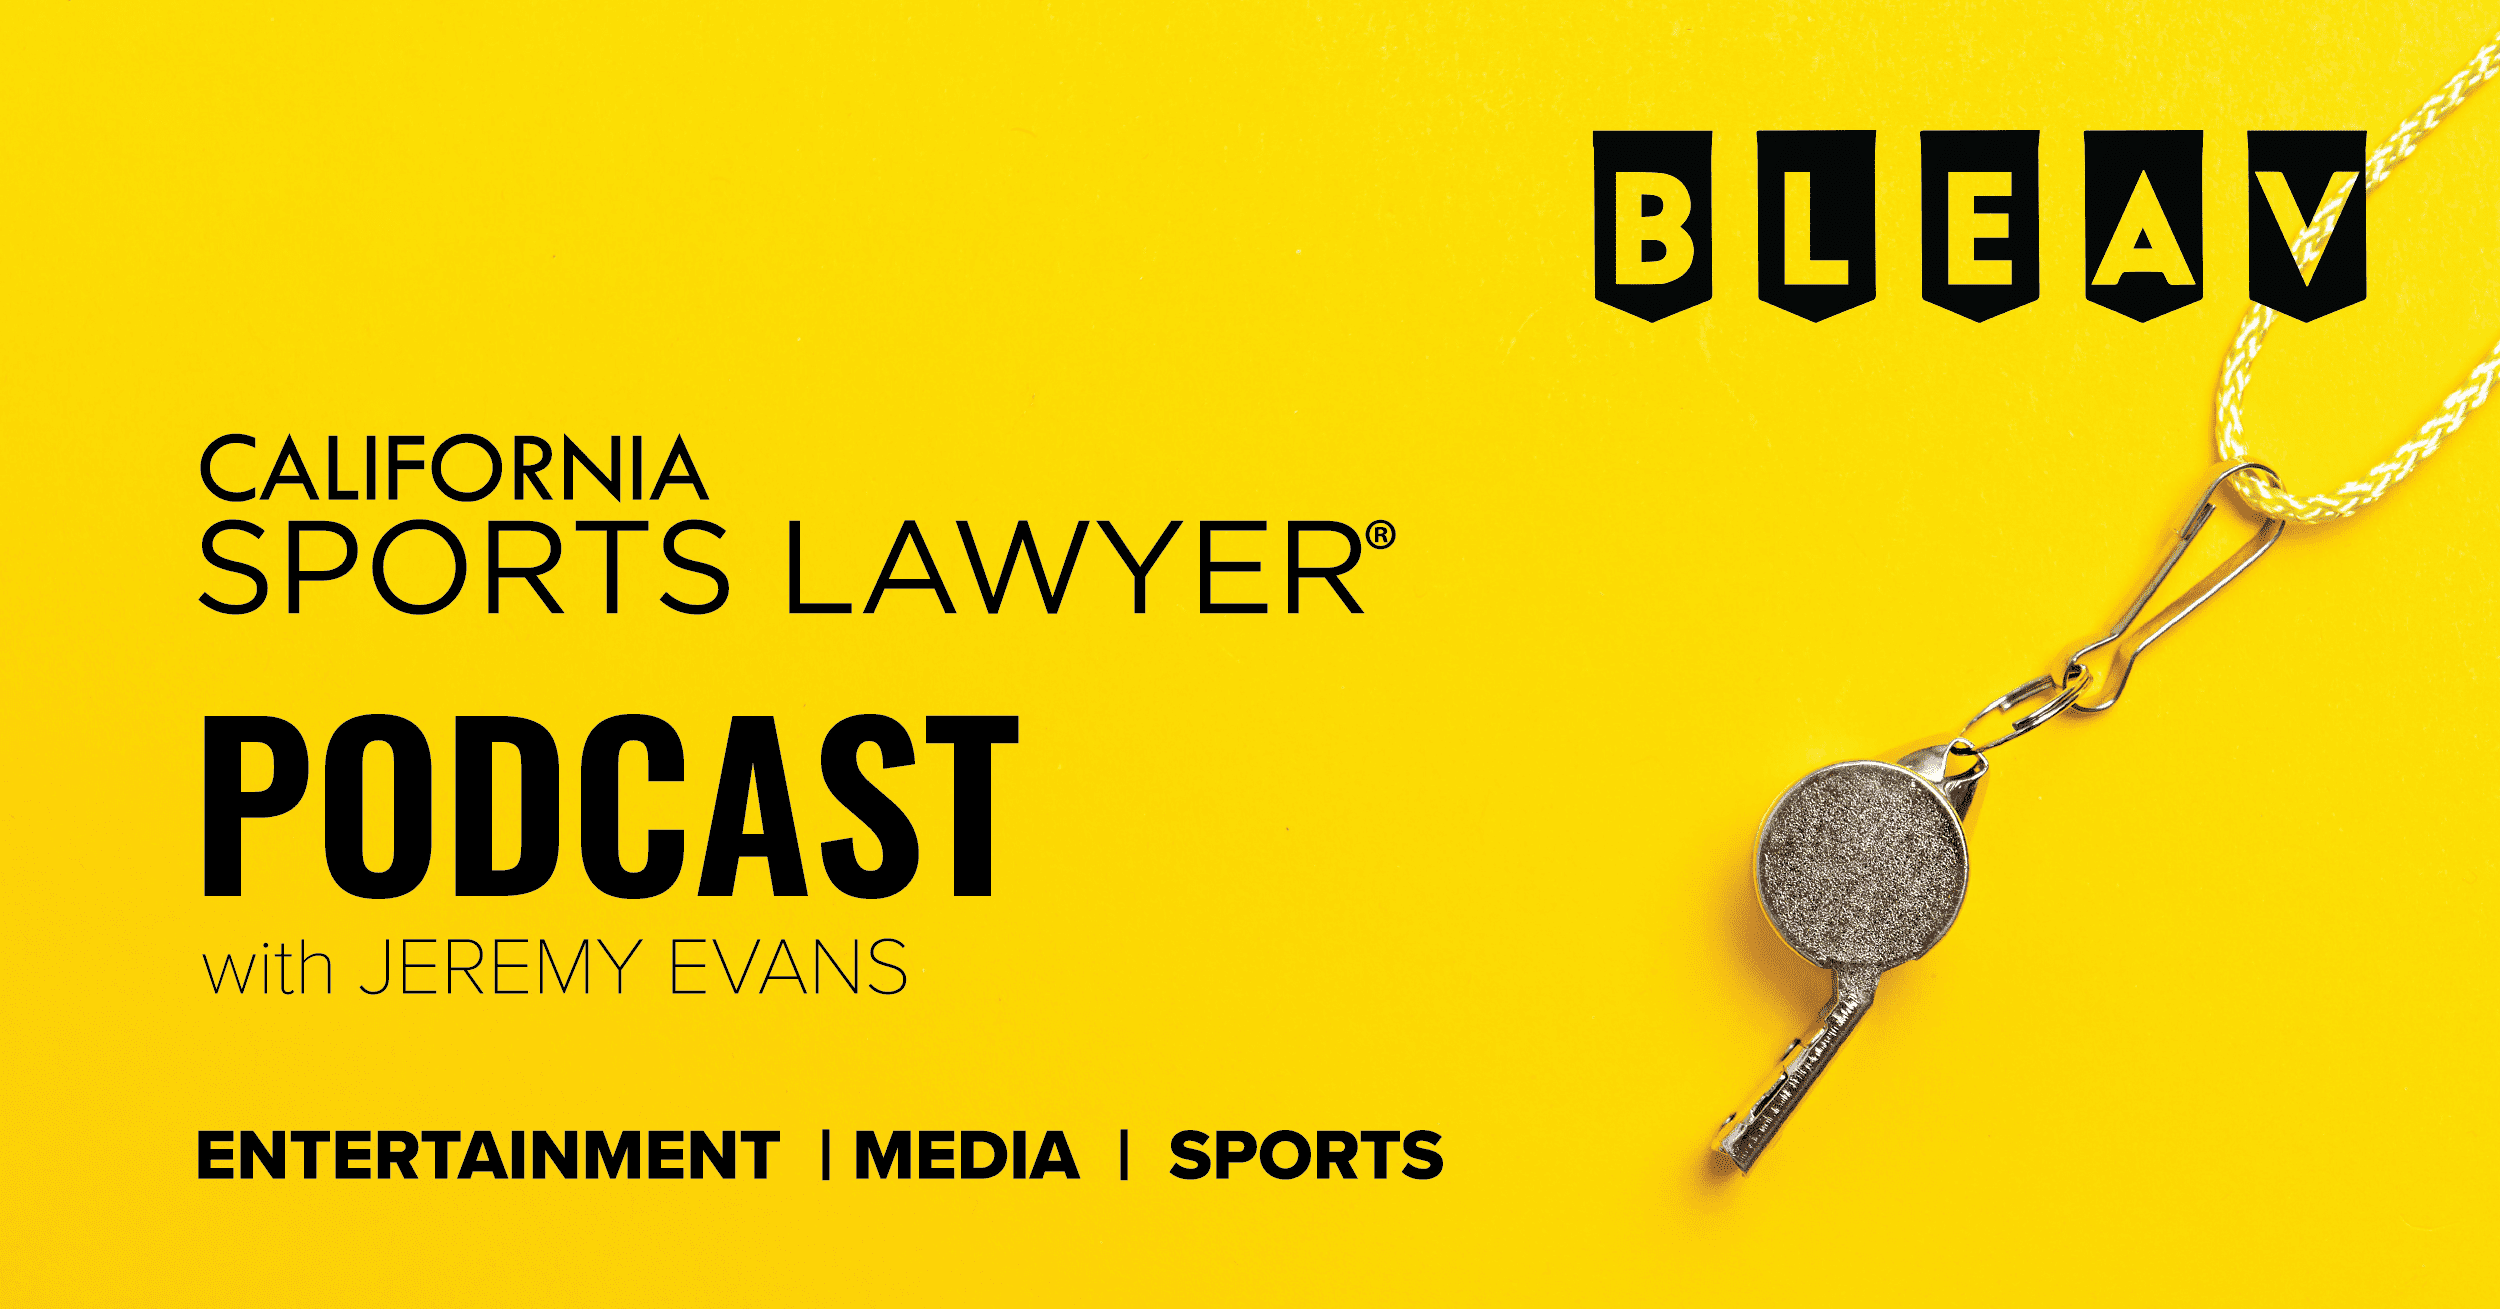 California Sports Lawyer® Podcast with Jeremy Evans: 30+ Minutes of Fame w/ Brian Hannula, Chief Executive Officer at SIEGE Sports & Entertainment